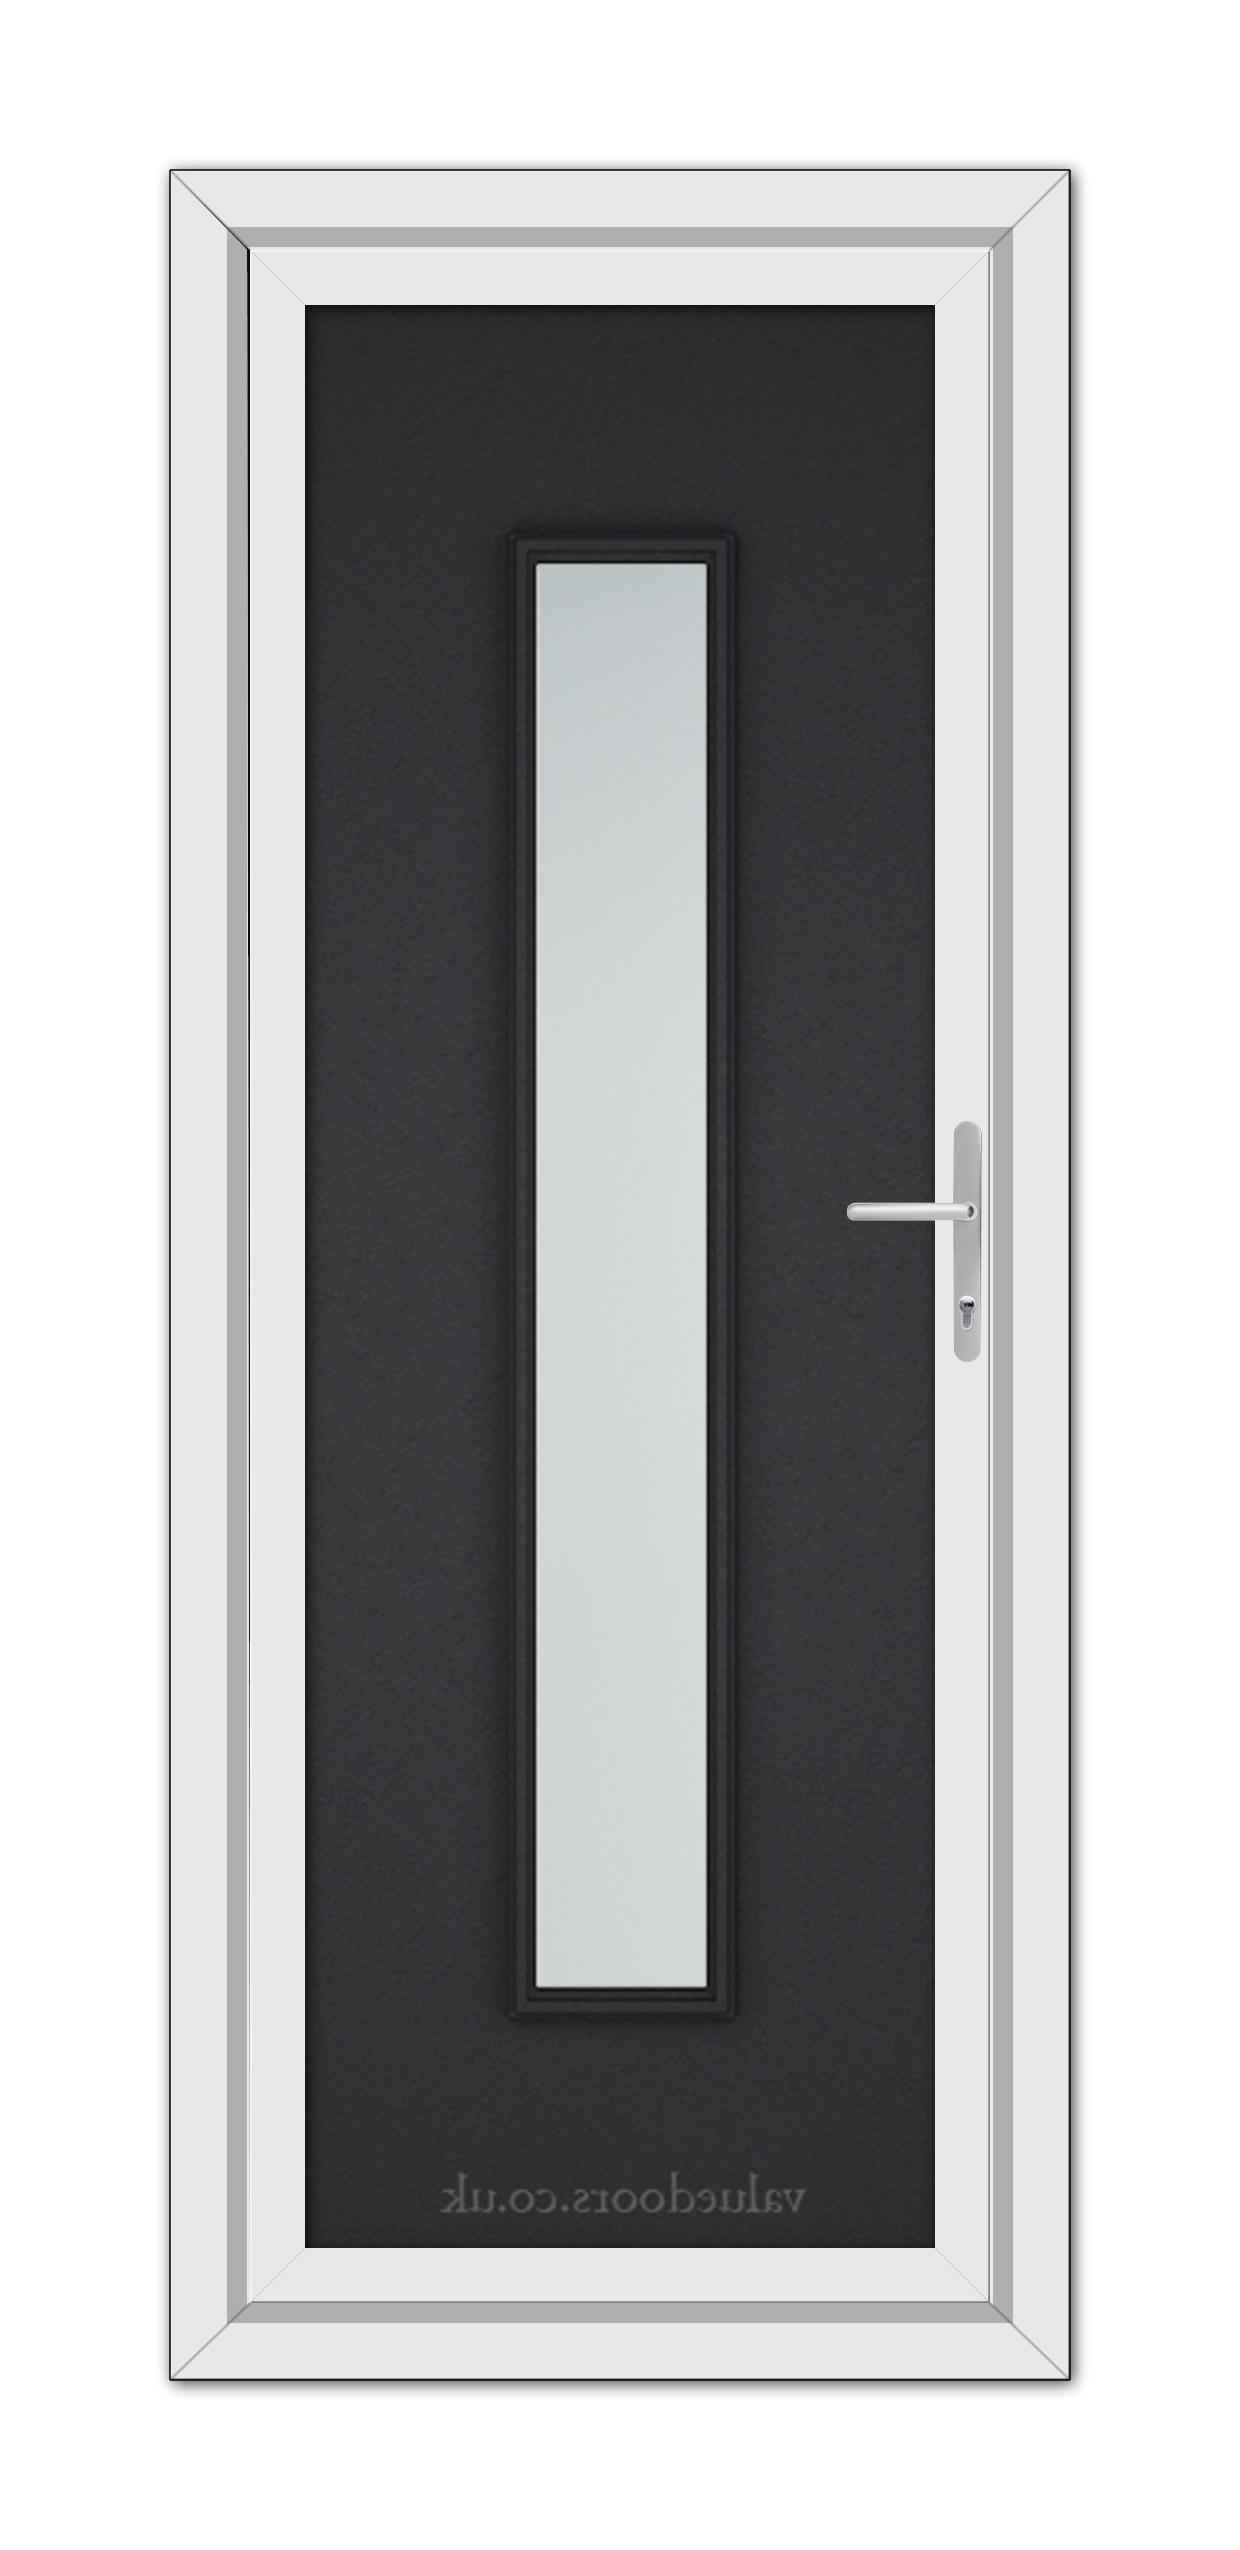 A modern Black Brown Rome uPVC door with a vertical glass panel, framed in white, featuring a silver handle on the right side.